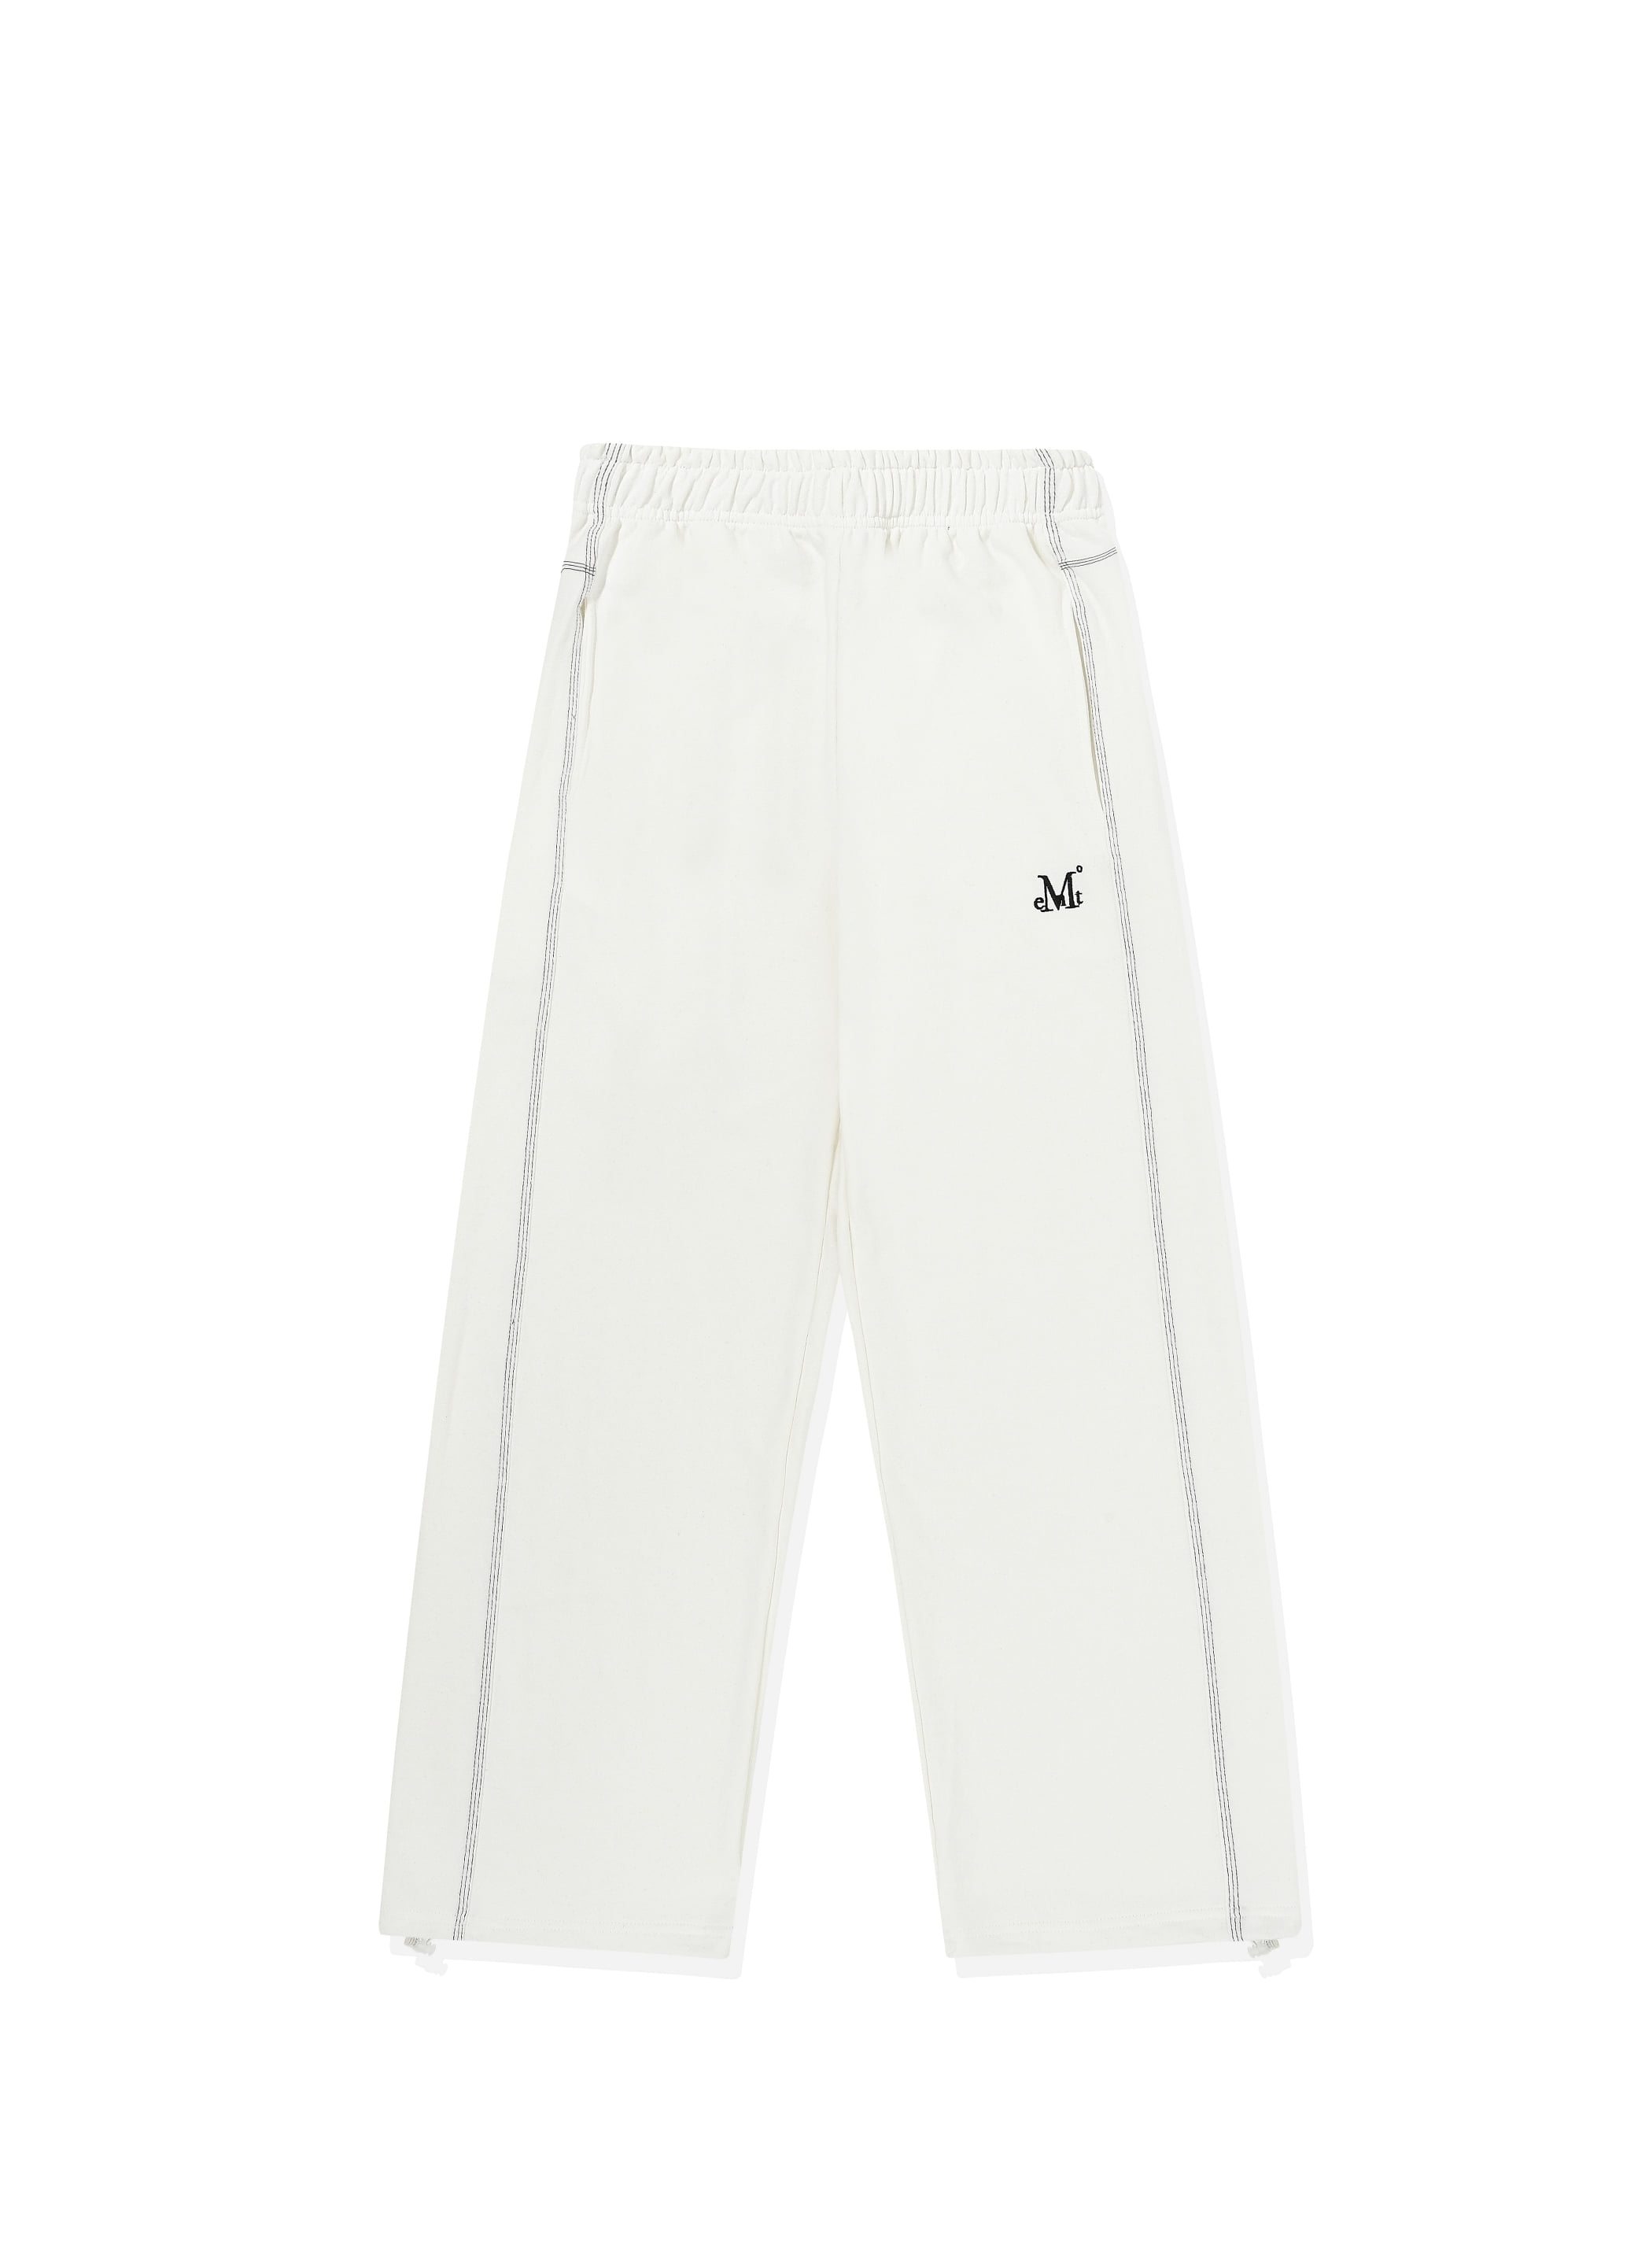 MUCENT BIG OVER WIDE SWEAT PANTS (WHITE)